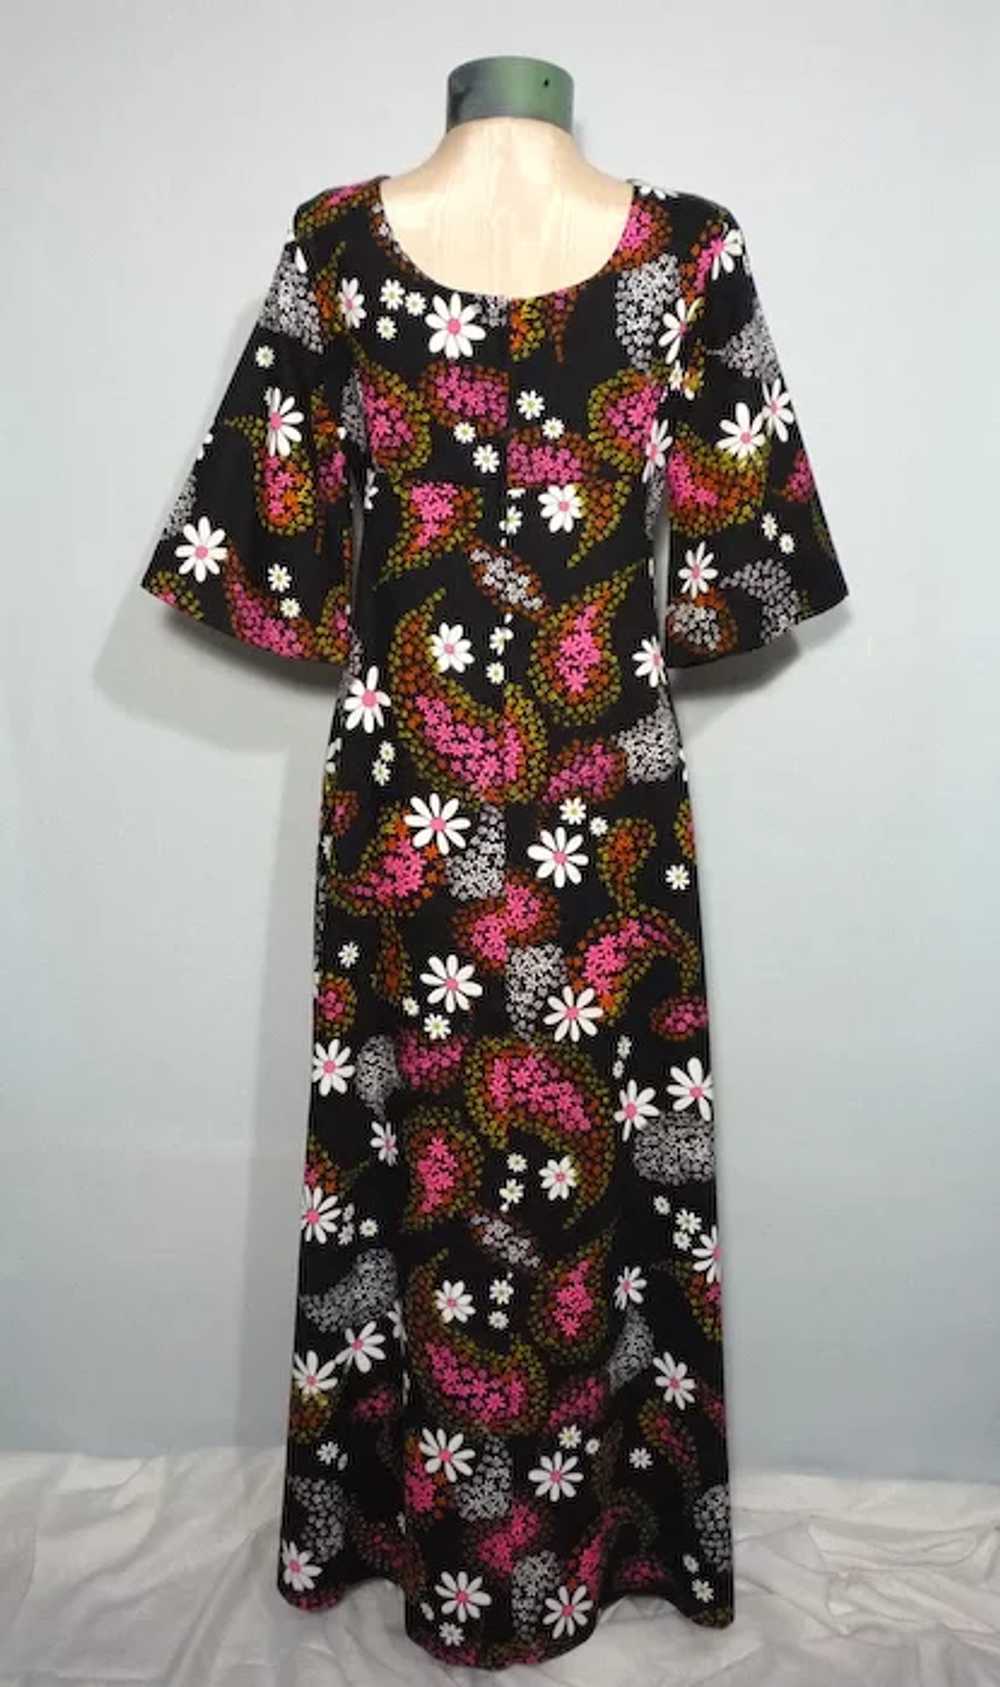 Vintage 1970s Floral Maxi Dress Ui Maikai Made in… - image 3